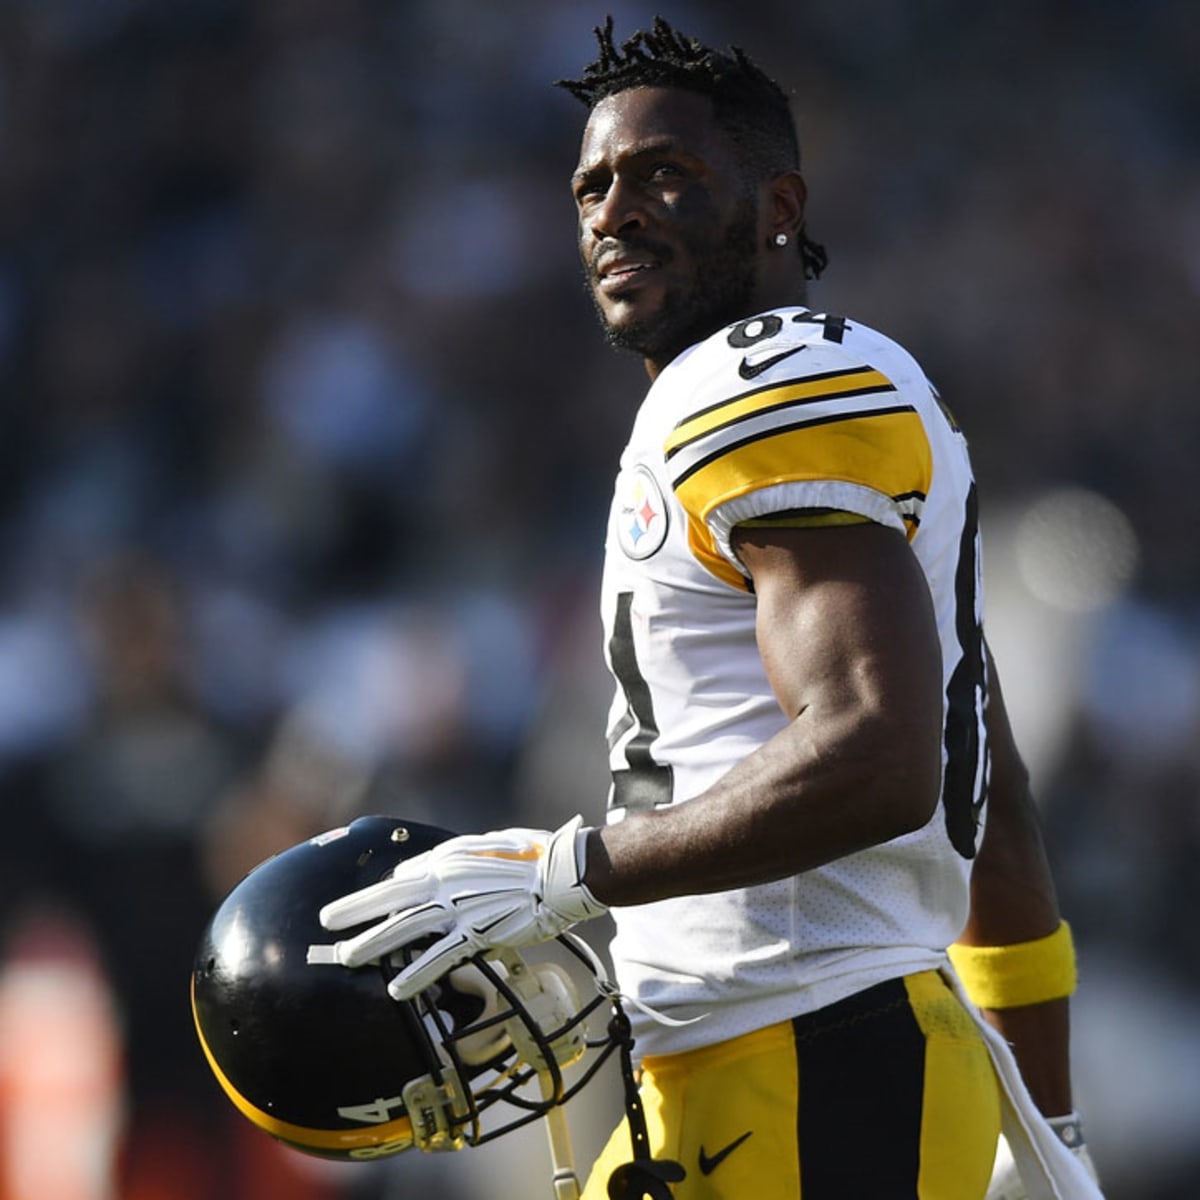 Antonio Brown won't play for Raiders without old helmet - Sports Illustrated